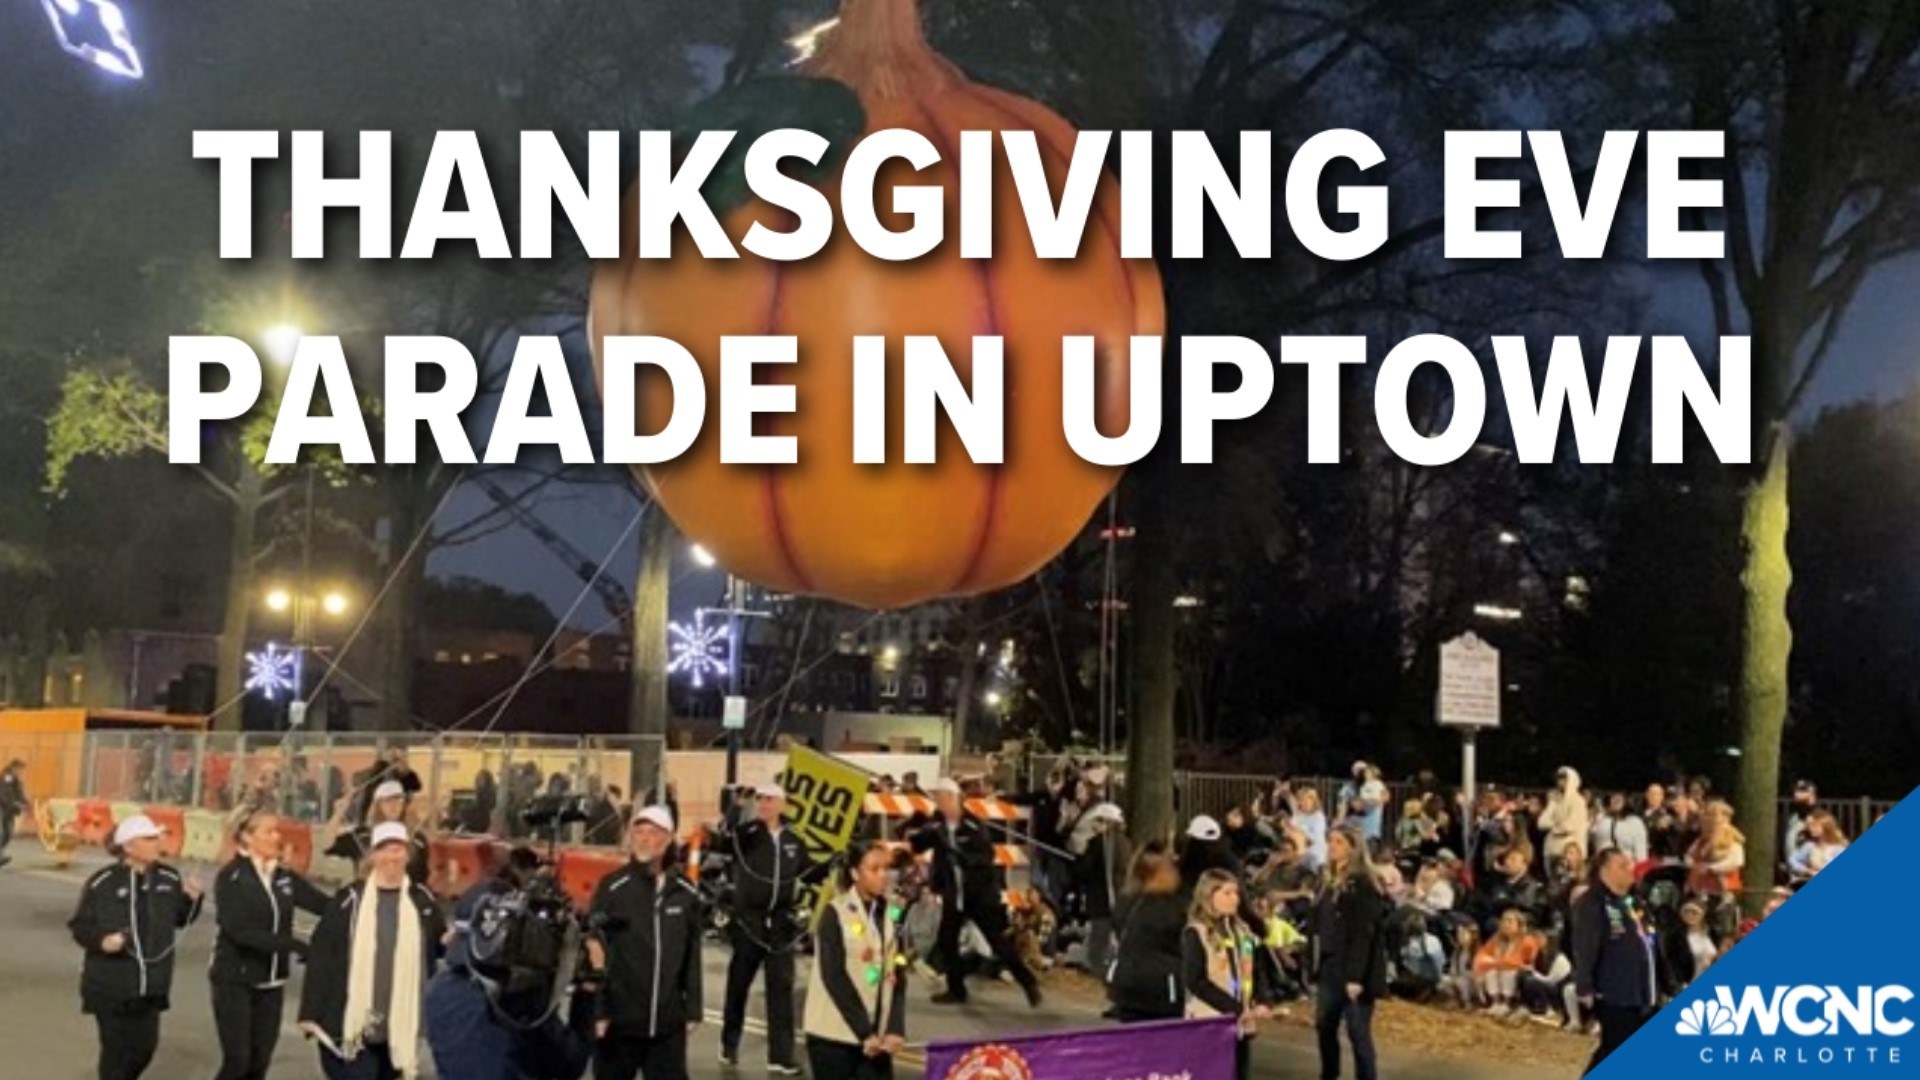 Underneath the loud music, colorful floats, and larger-than-life balloons hoisted into the air, people said it was a reminder that there's a lot to be thankful for.